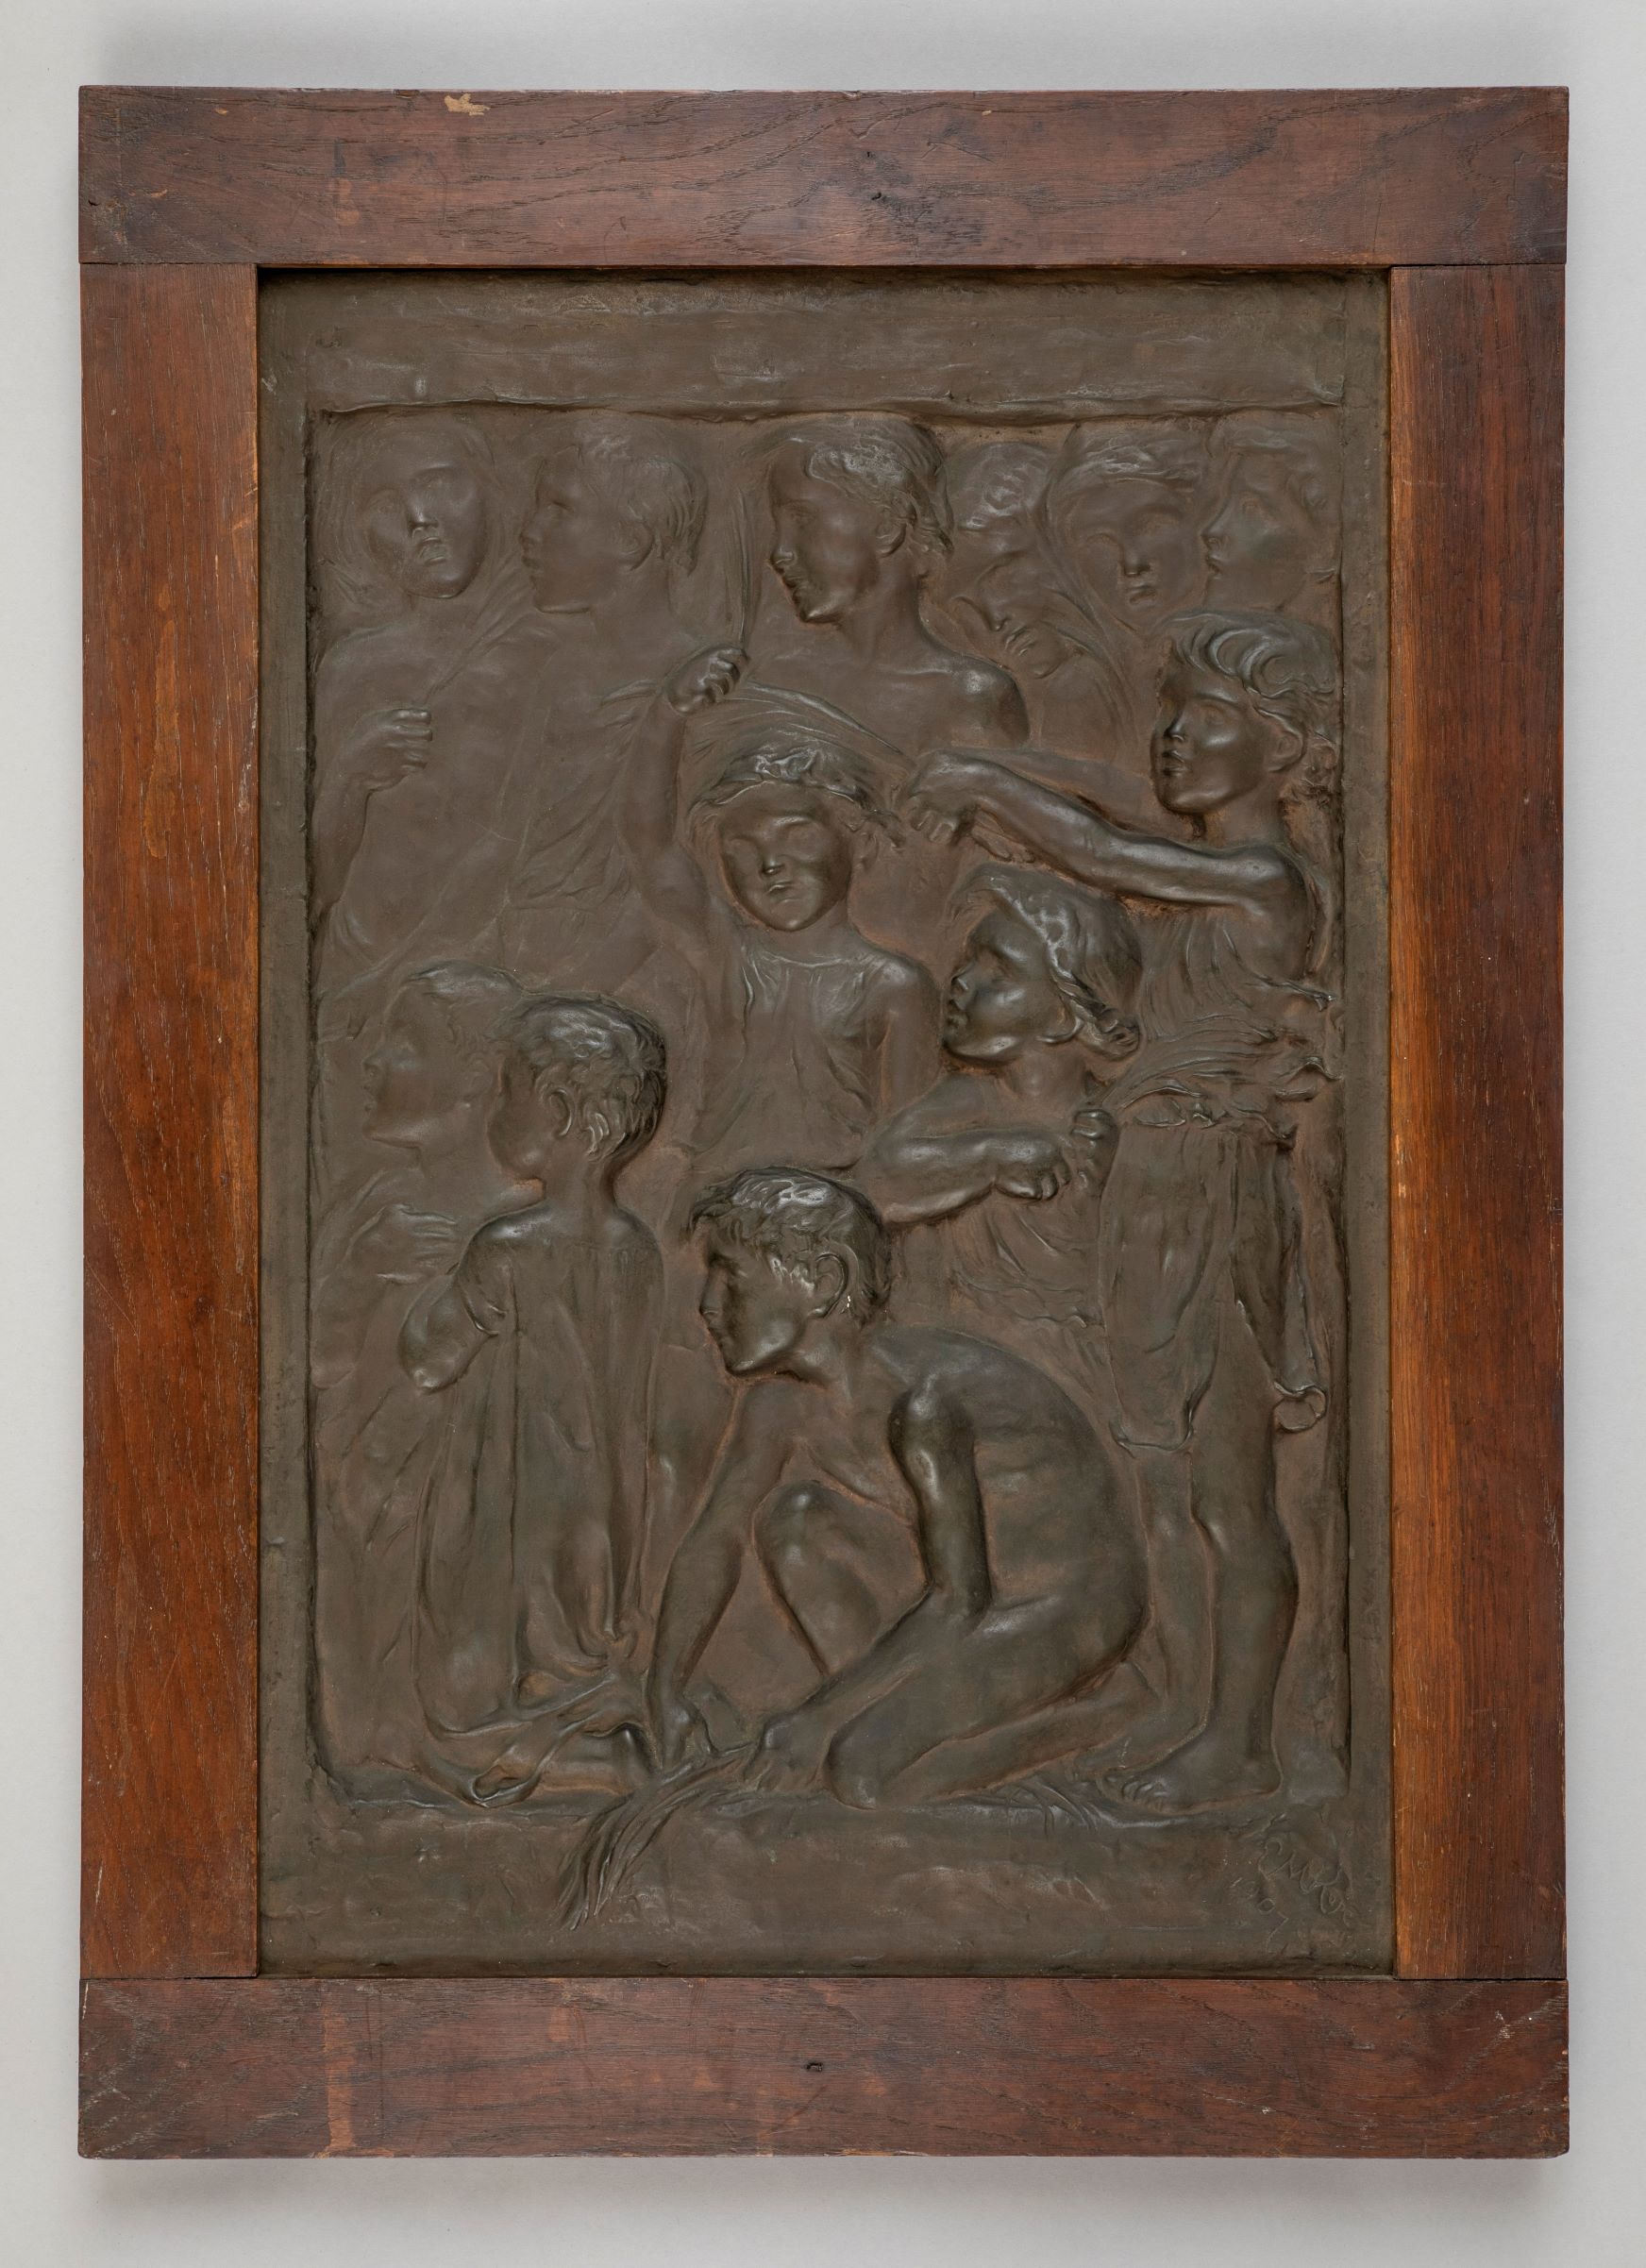 a relief sculpture in dark bronze of a group of children looking in the same direction to the left